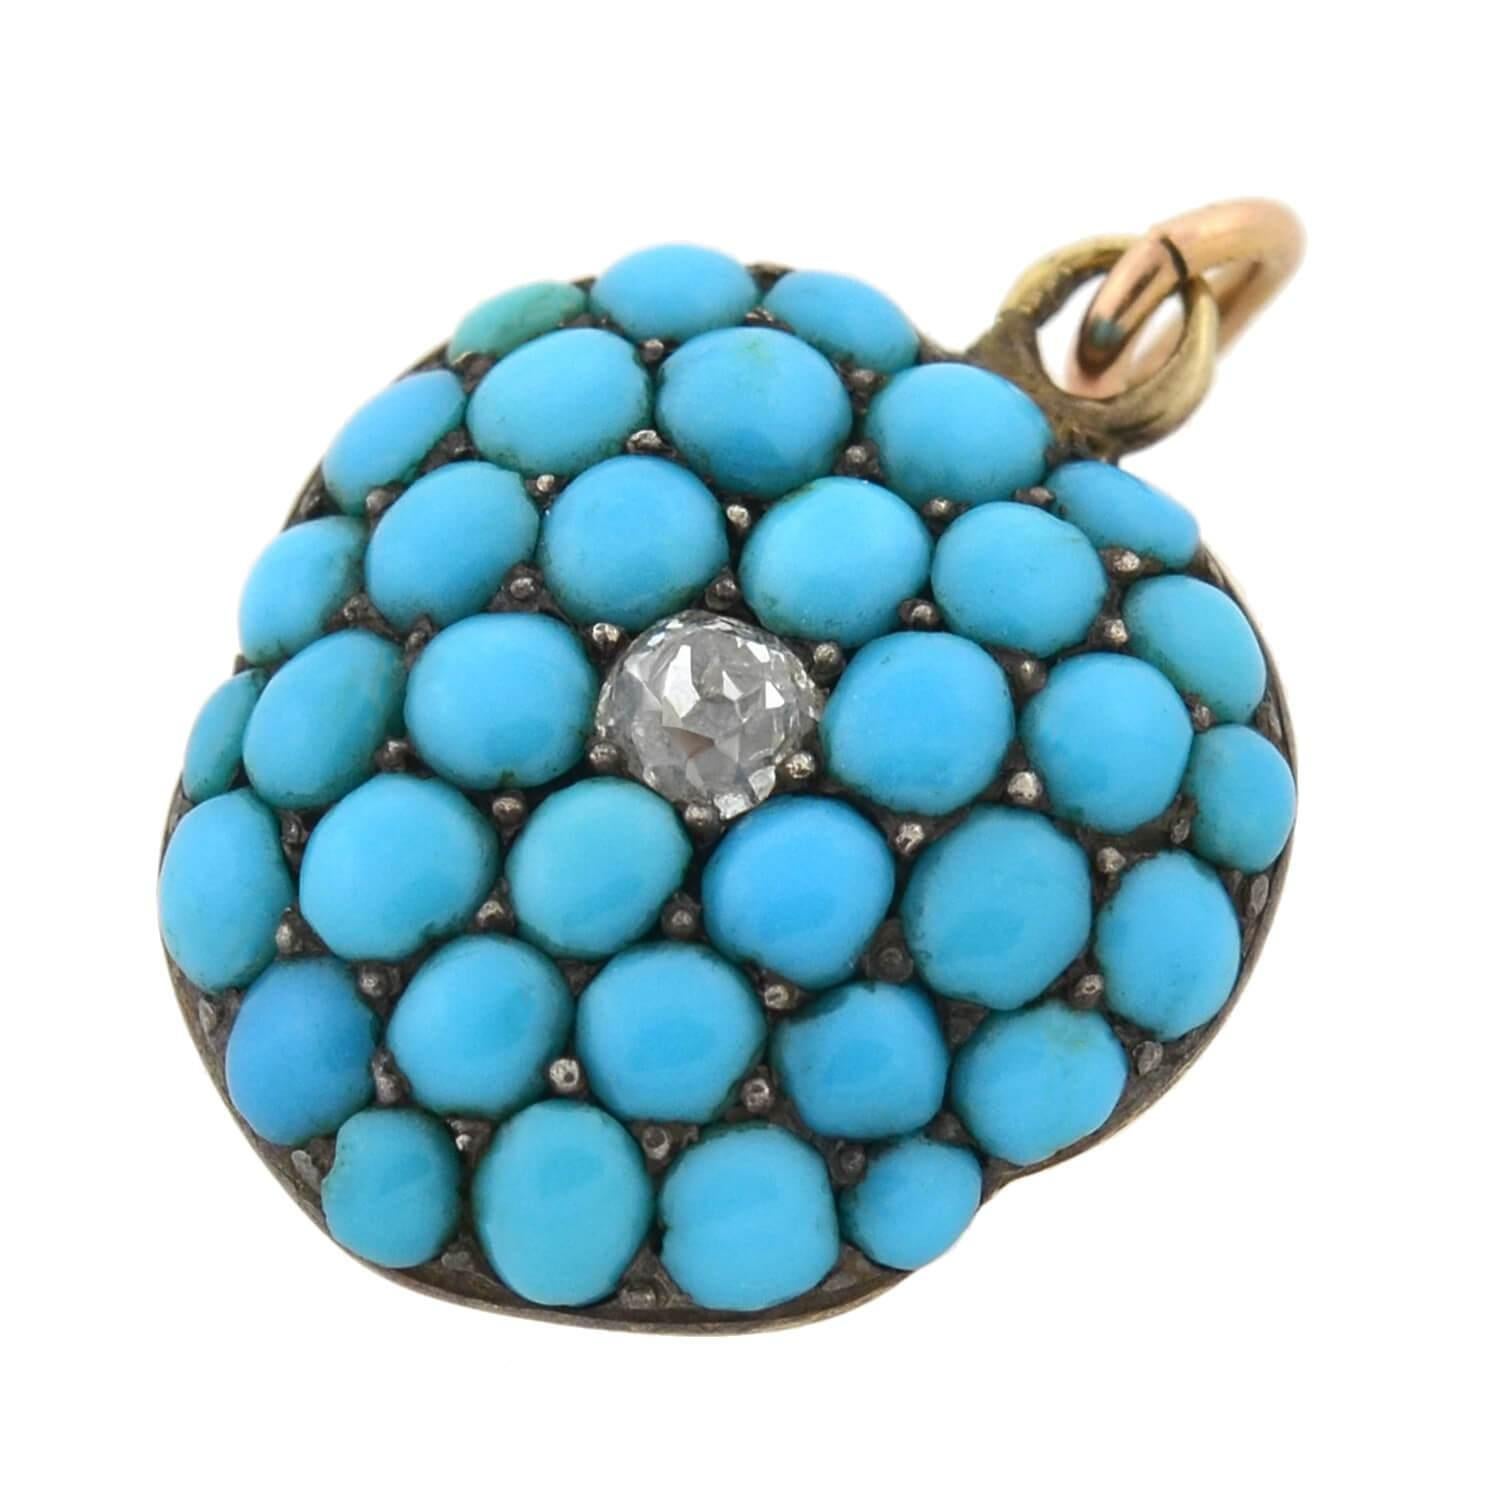 A gorgeous turquoise locket from the Victorian (ca1880) era! This lovely piece is crafted in 15kt yellow gold and sterling silver and forms a shape closely resembling a puffy heart or flower. Completely covering the front surface is a vibrant array